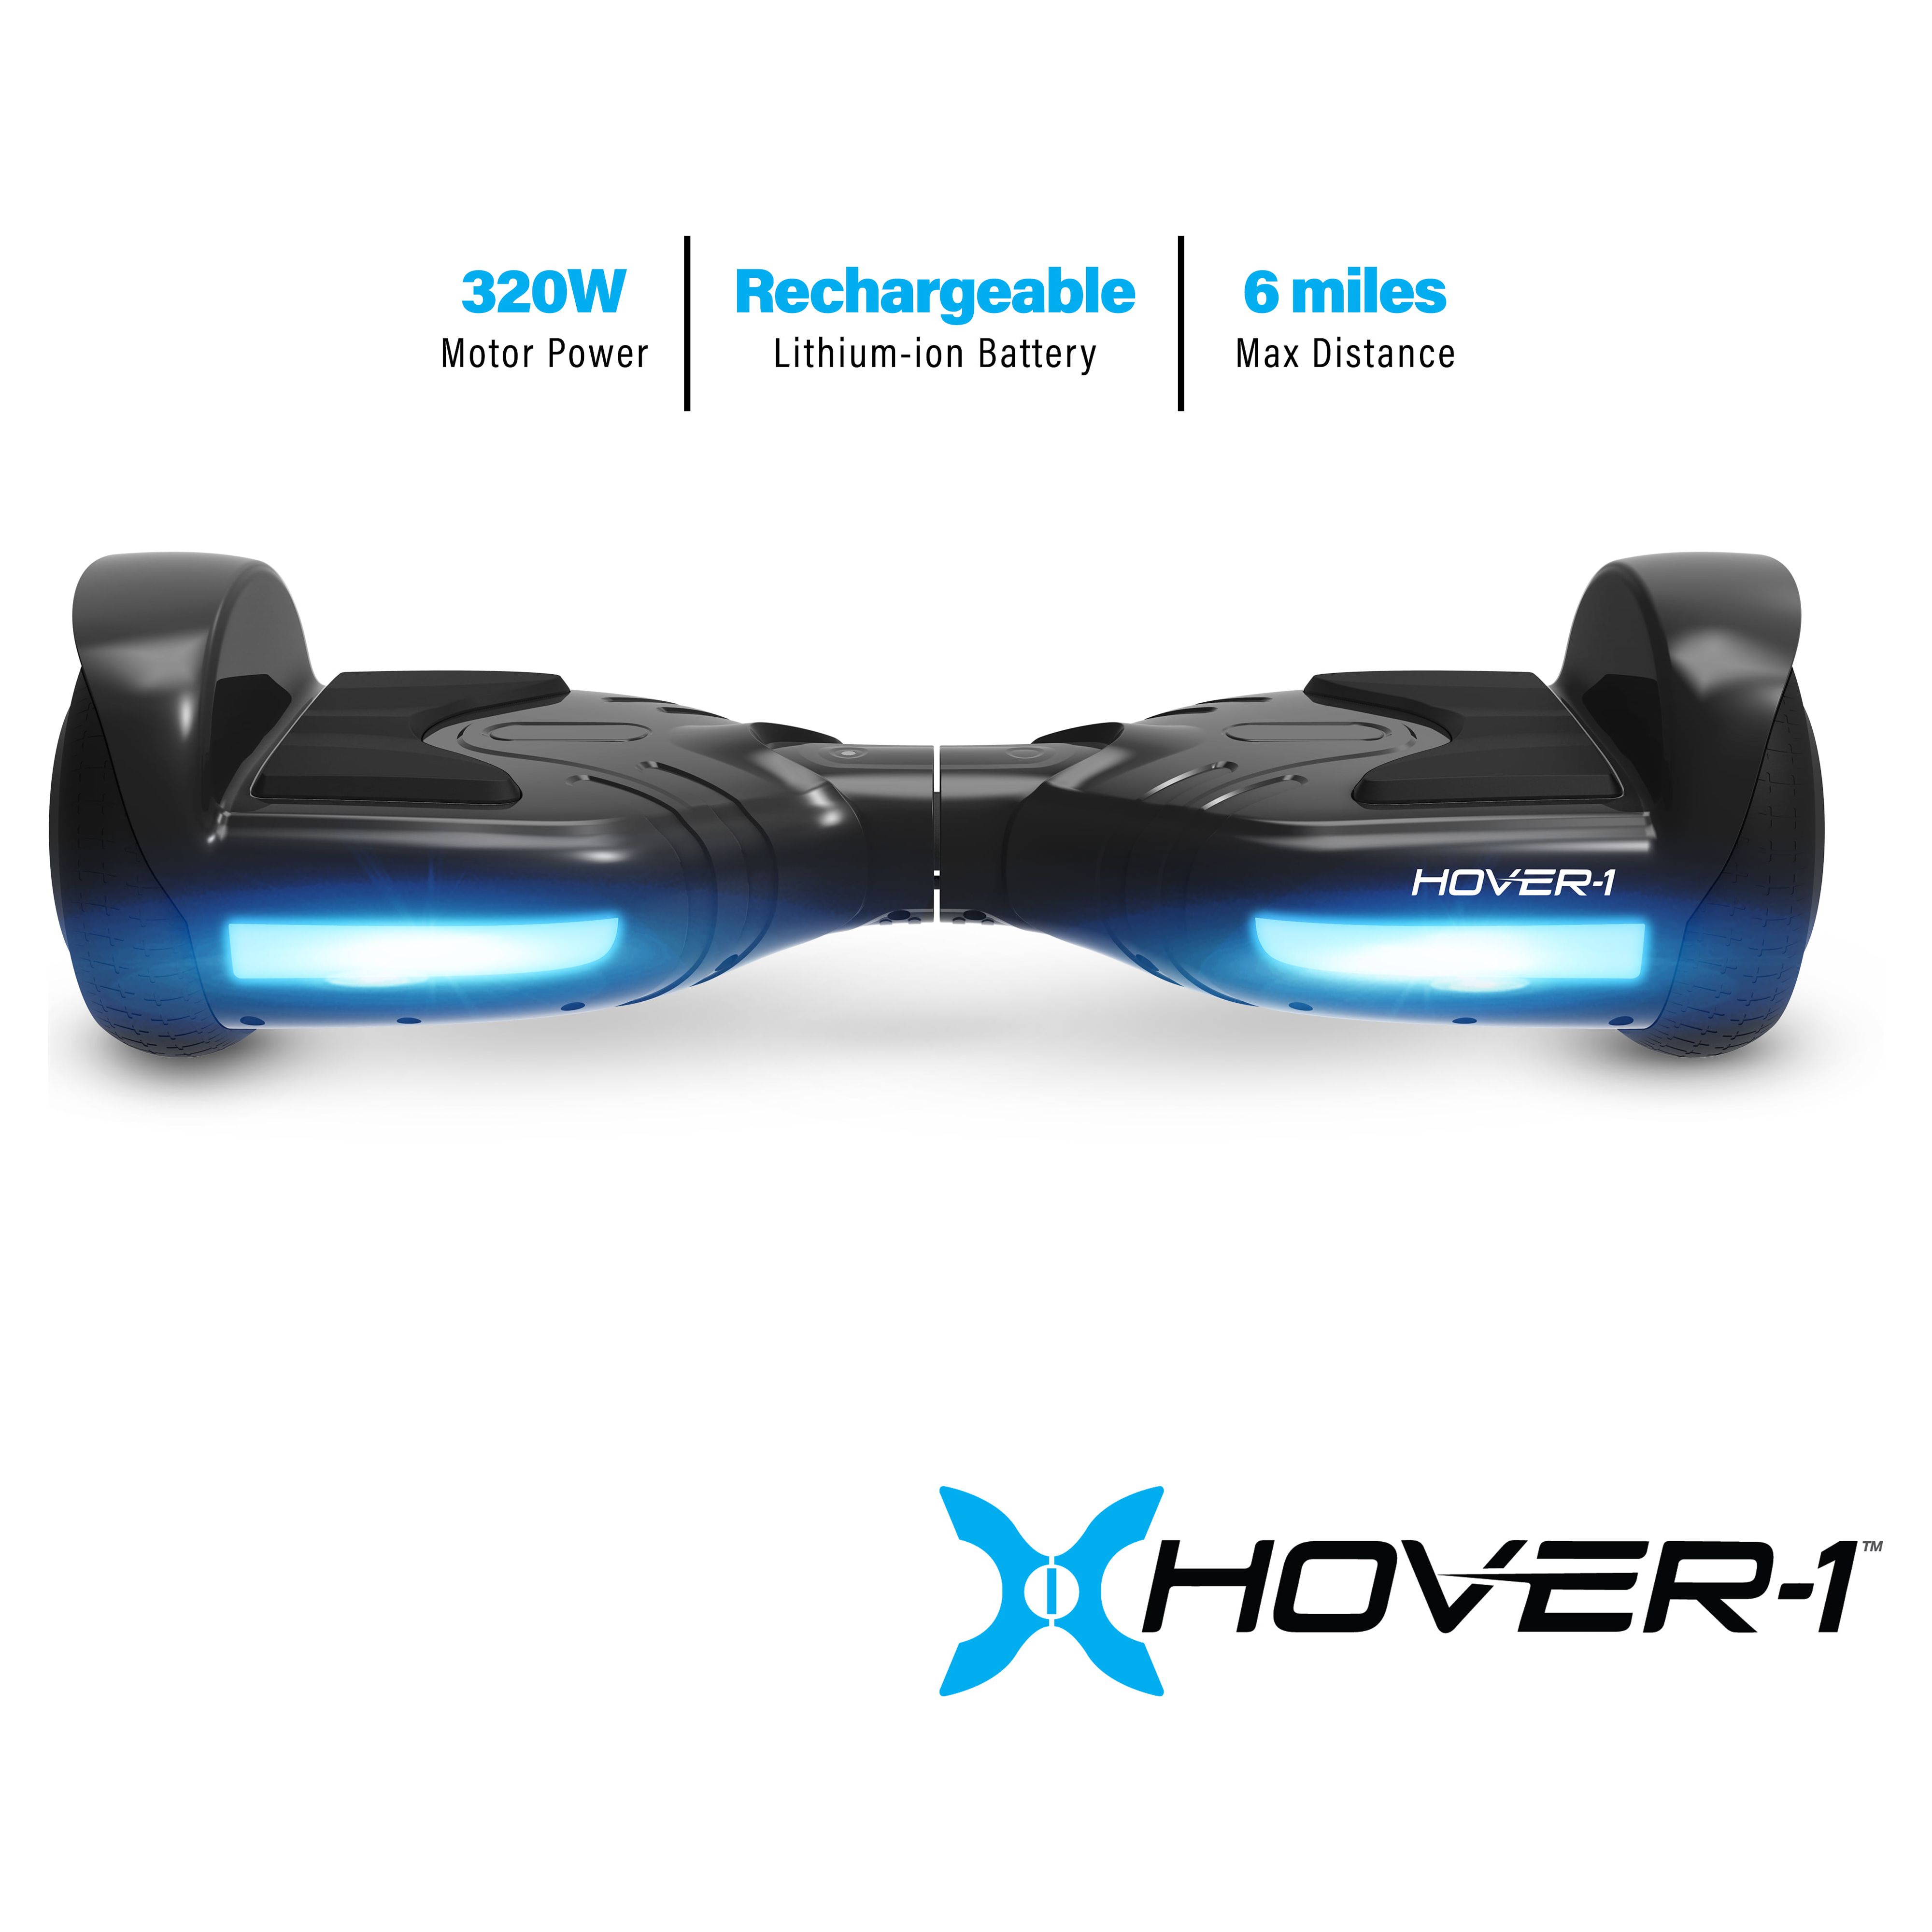 Hover-1 Nova Hoverboard Max Distance 6 Miles - image 4 of 11